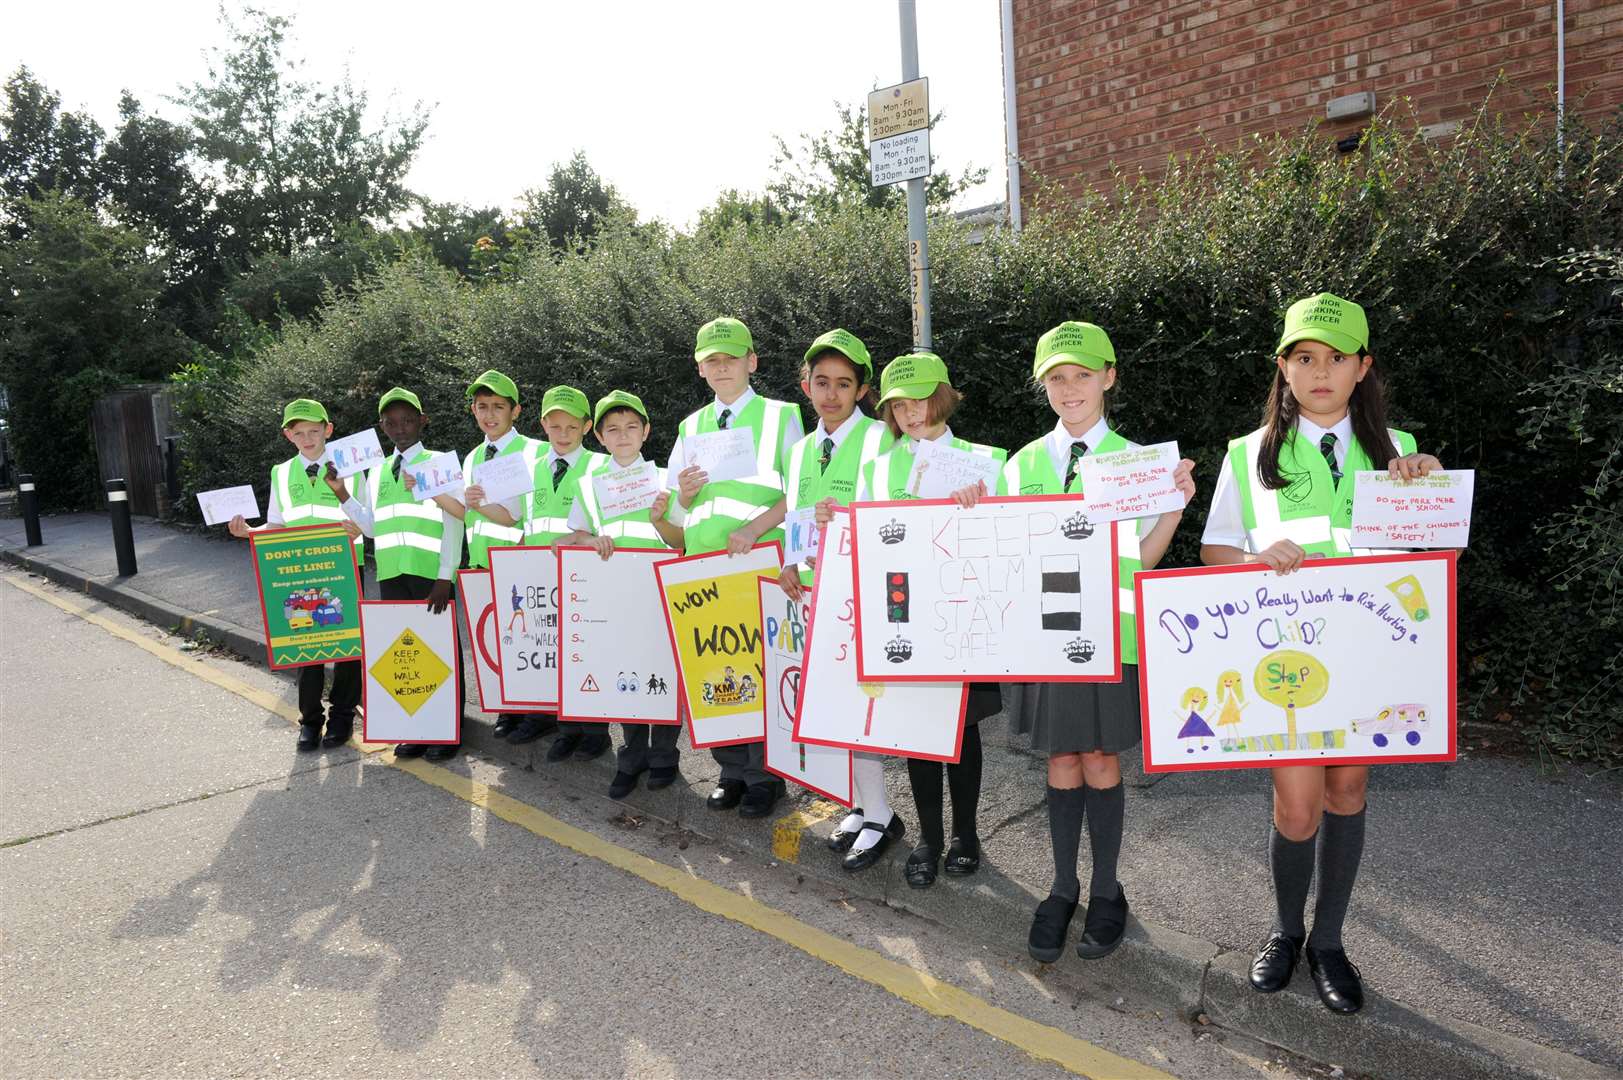 Pupils at Riverview Junior School patrolled the streets in 2013 in a bid to stop inconsiderate parking